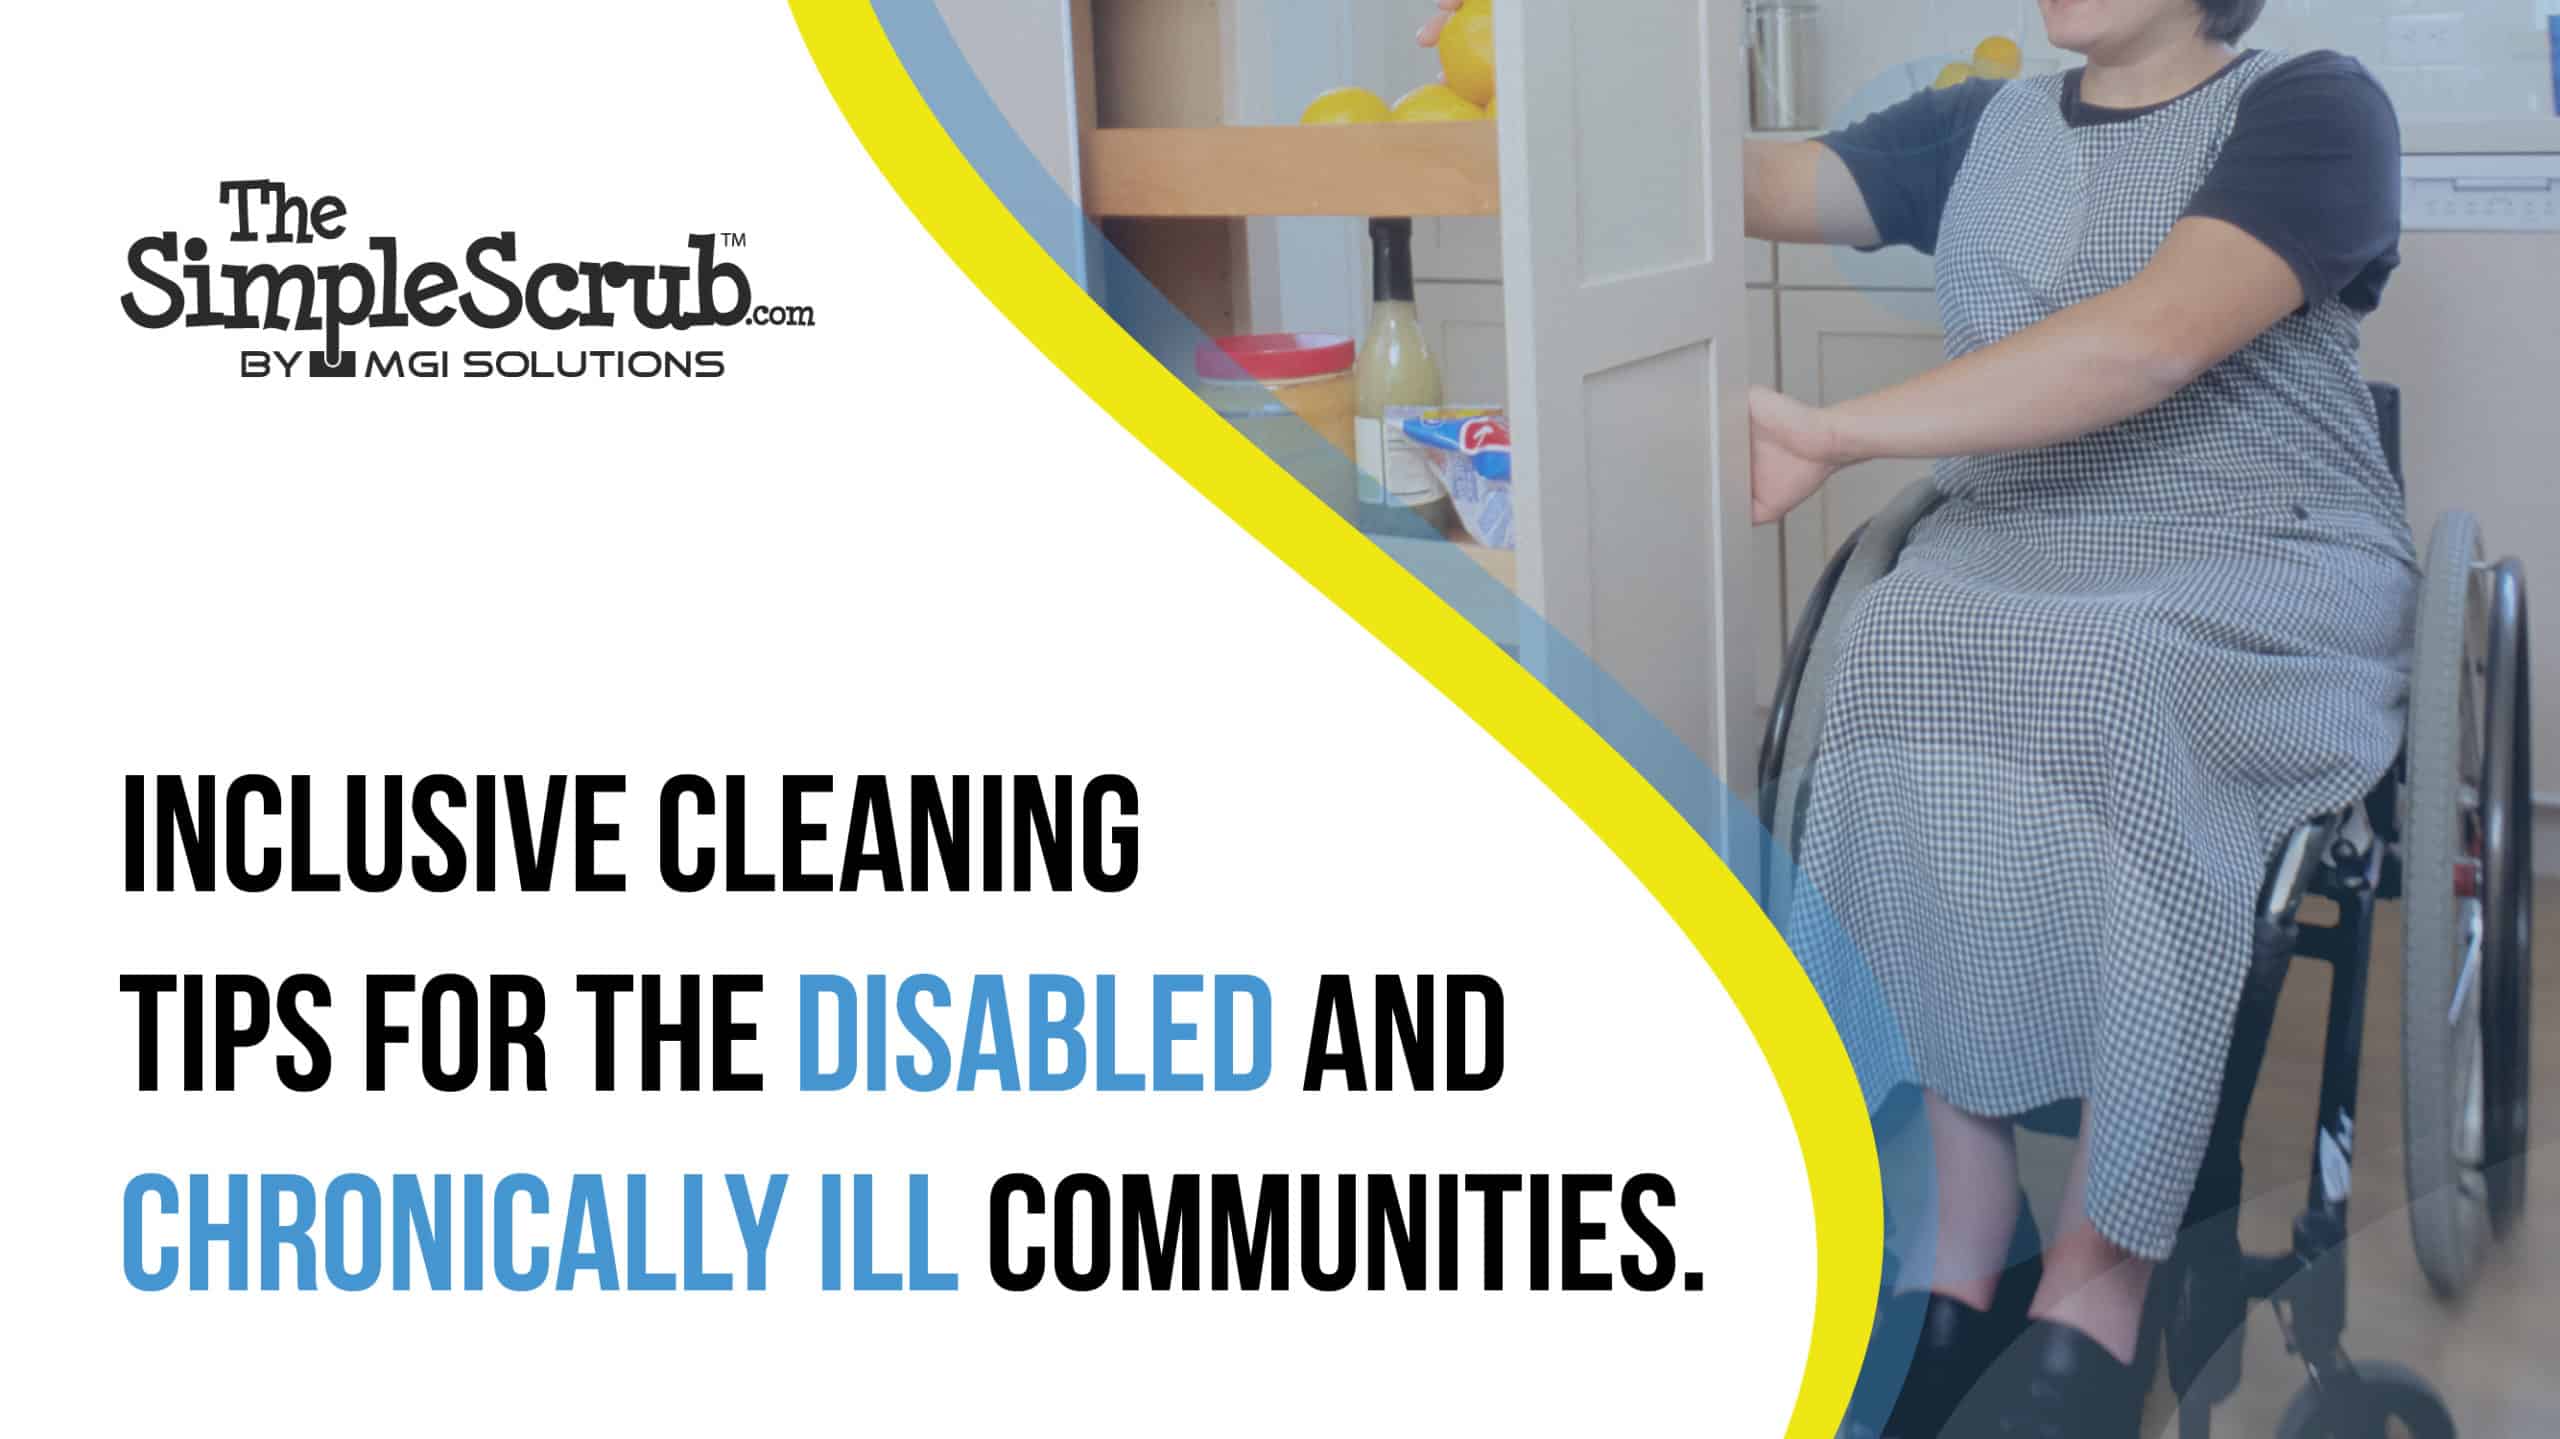 An image of a person in wheelchair retrieves a lemon from a pull out drawer is featured in The Simple Scrub 